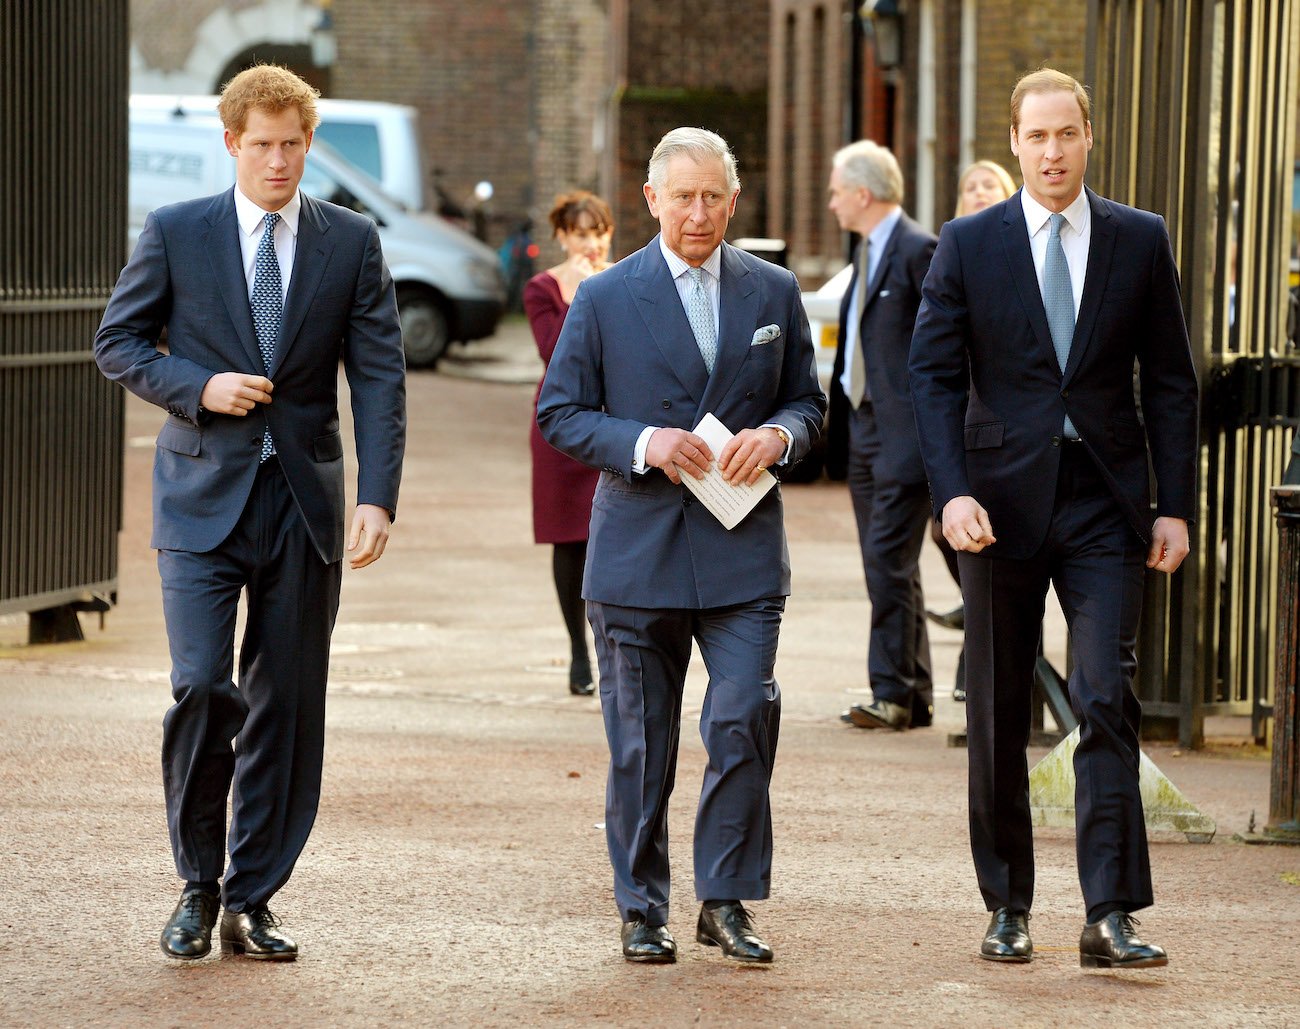 Prince Harry, Prince Charles, and Prince William wearing suits while walking next to each other